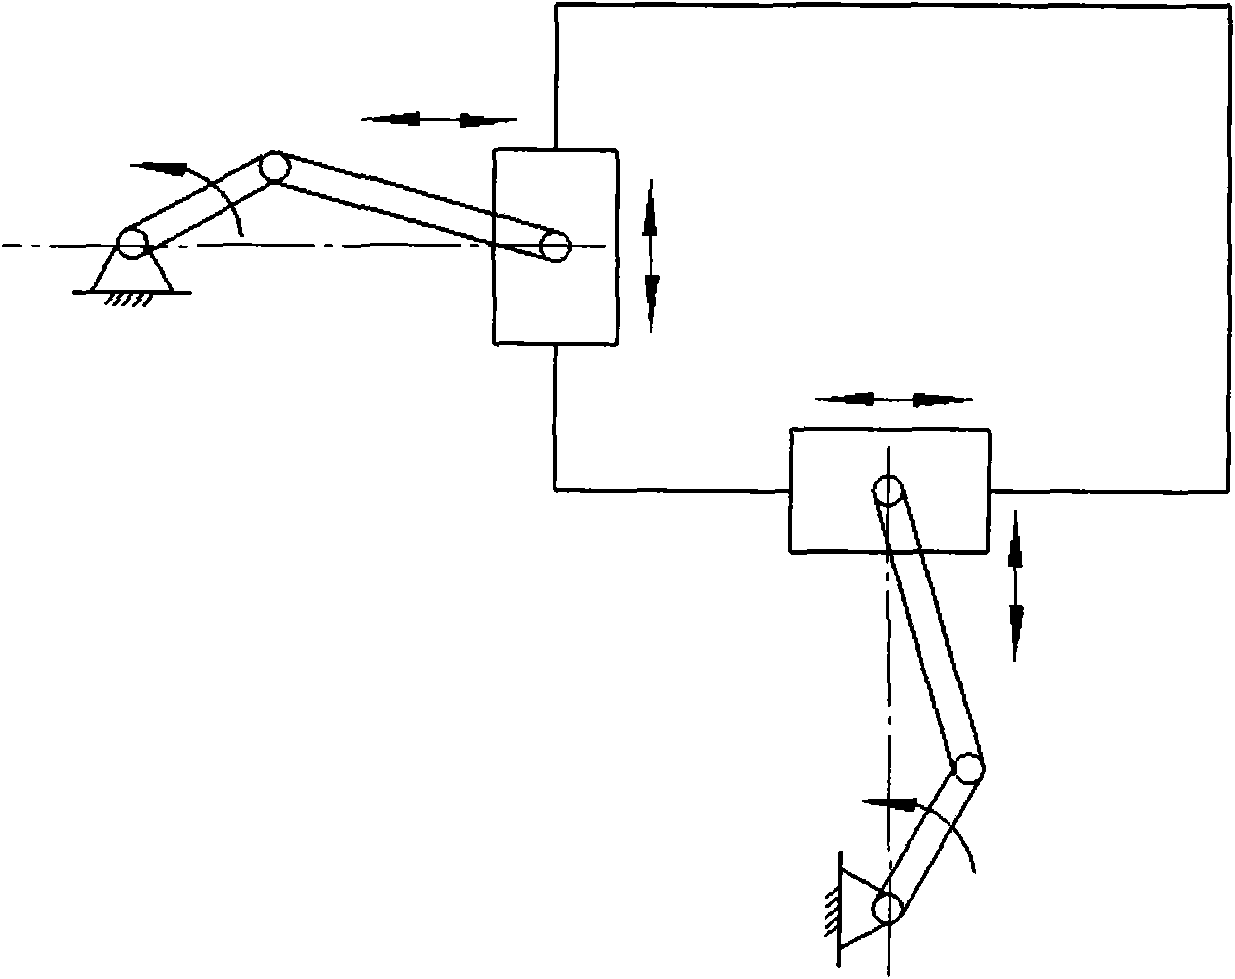 Series/parallel connection two-coordinate precise motion locating platform